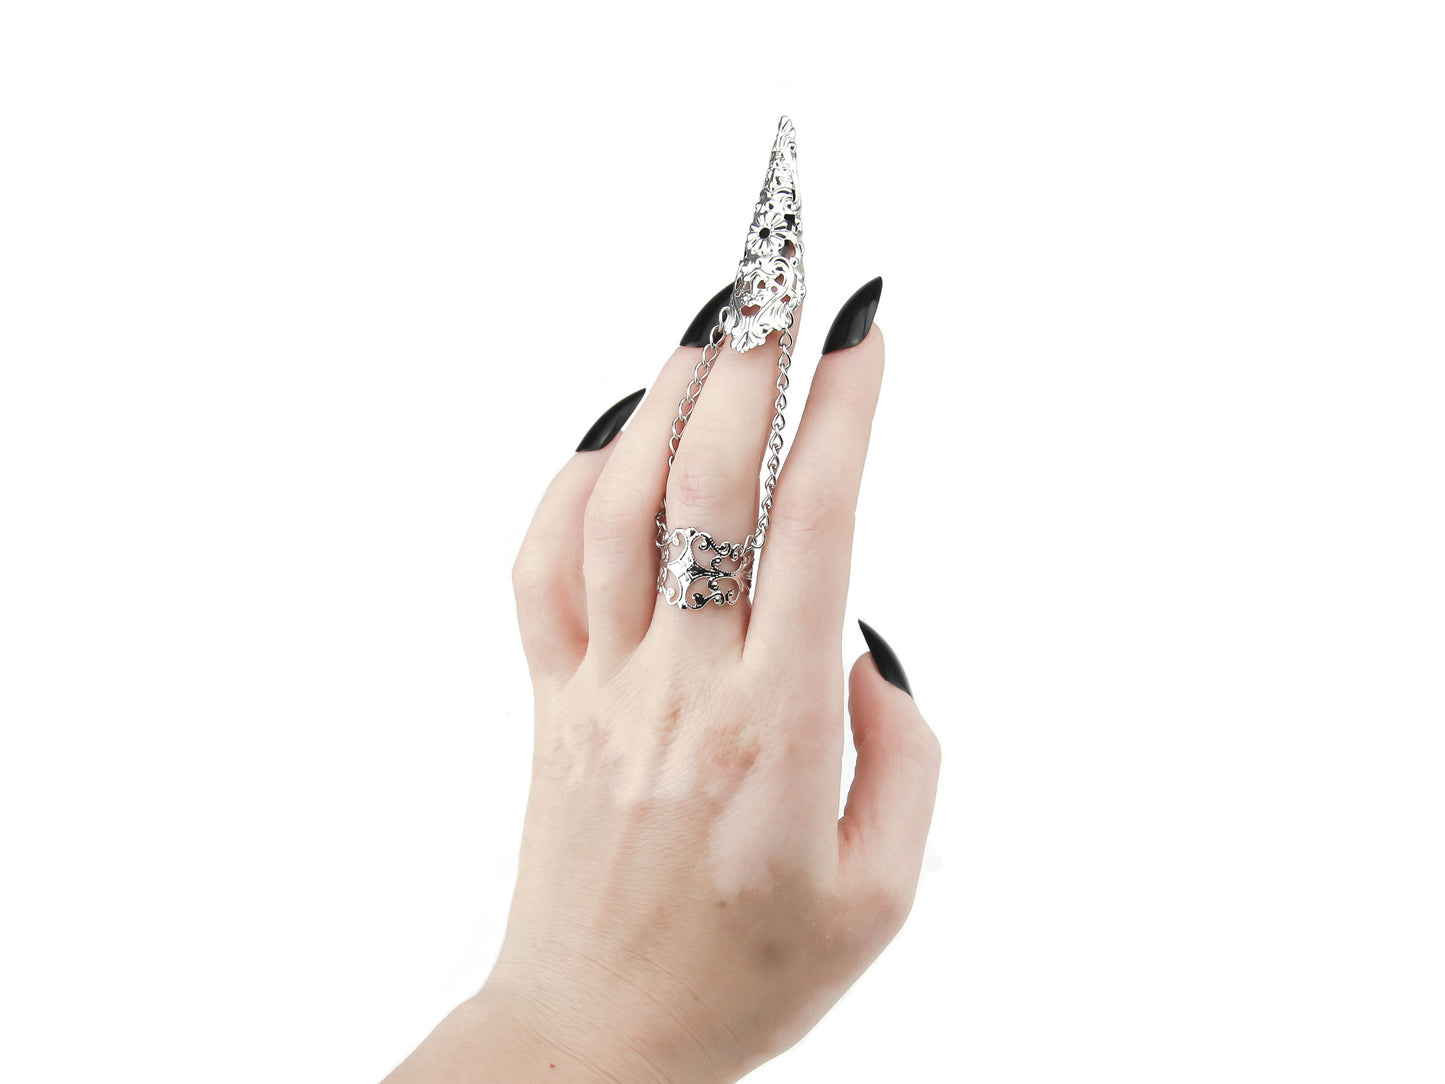 A hand adorned with Myril Jewels' intricate silver claw ring extends in a dramatic gesture, its dark avant-garde design complementing the bold black nail polish. Perfect for those with a love for Neo Gothic, Witchcore, and Gothic-chic styles, this ring is a statement piece for everyday wear and special occasions, including Halloween. Its craftsmanship and style cater to the unique tastes of punk and gothic lolita fashion enthusiasts